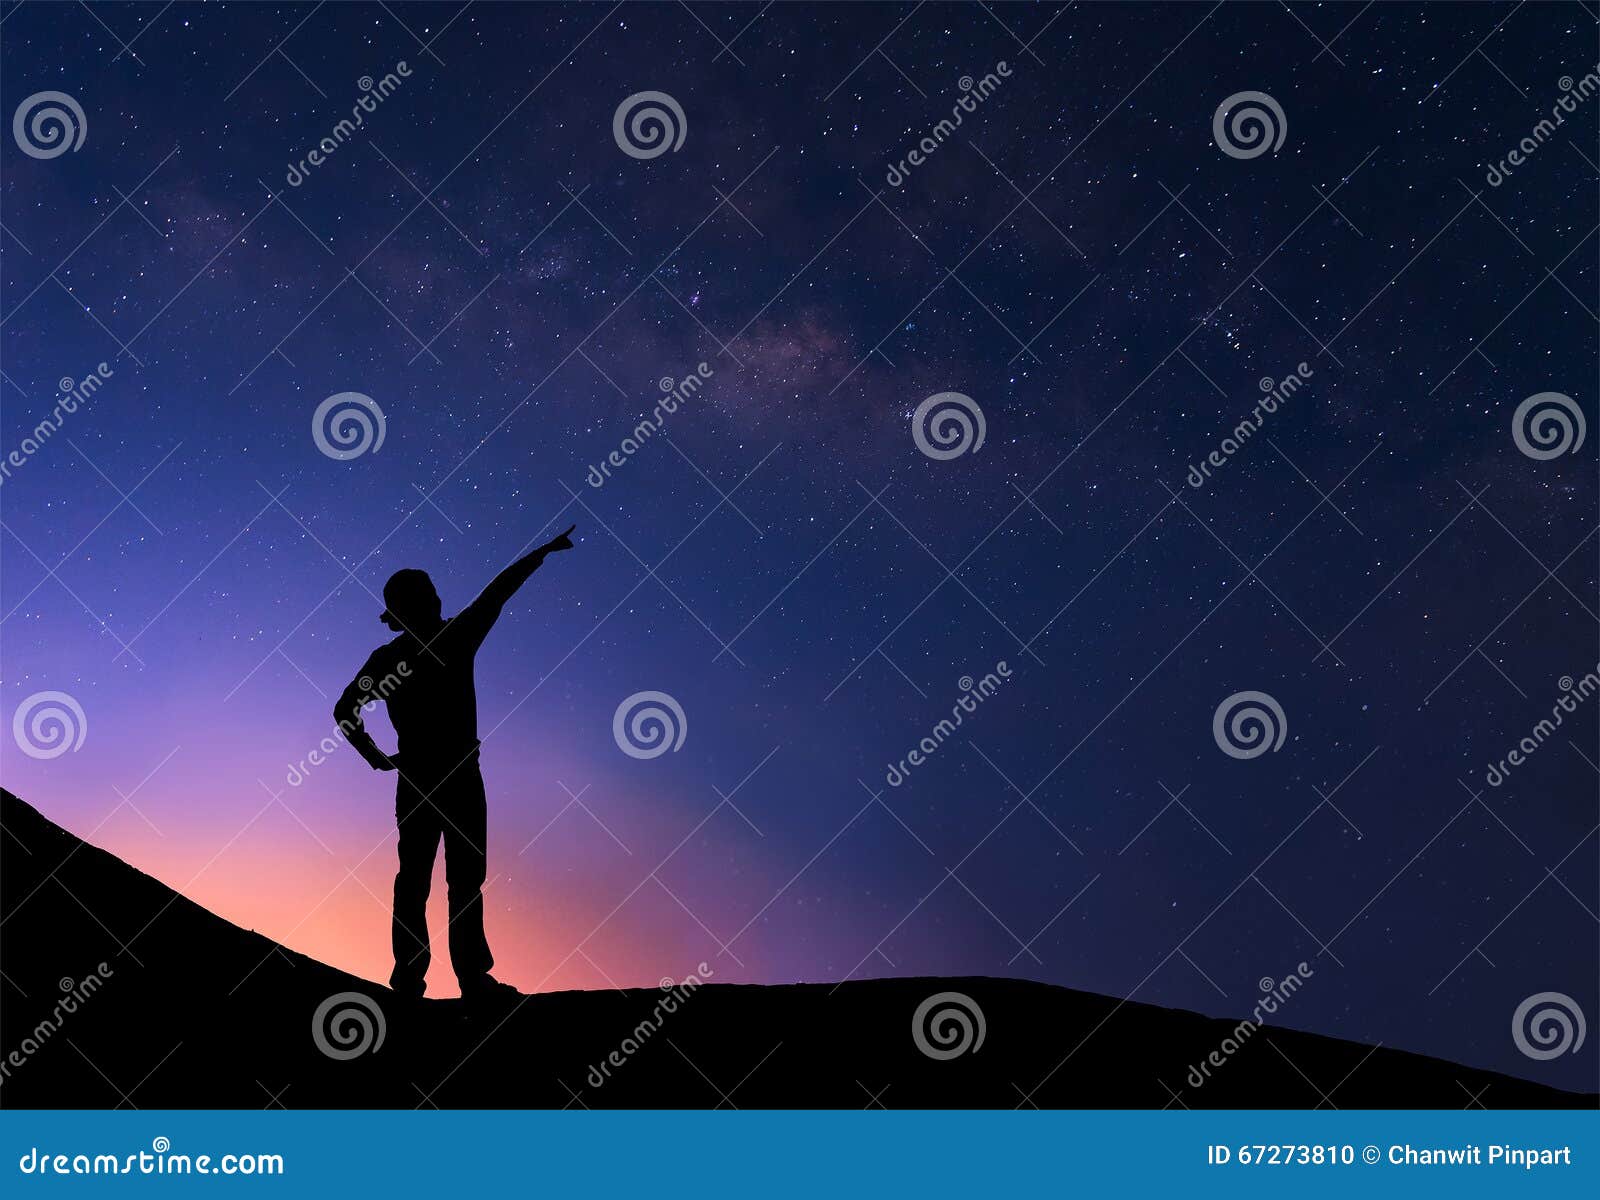 sillhouette of woman standing next to the milky way